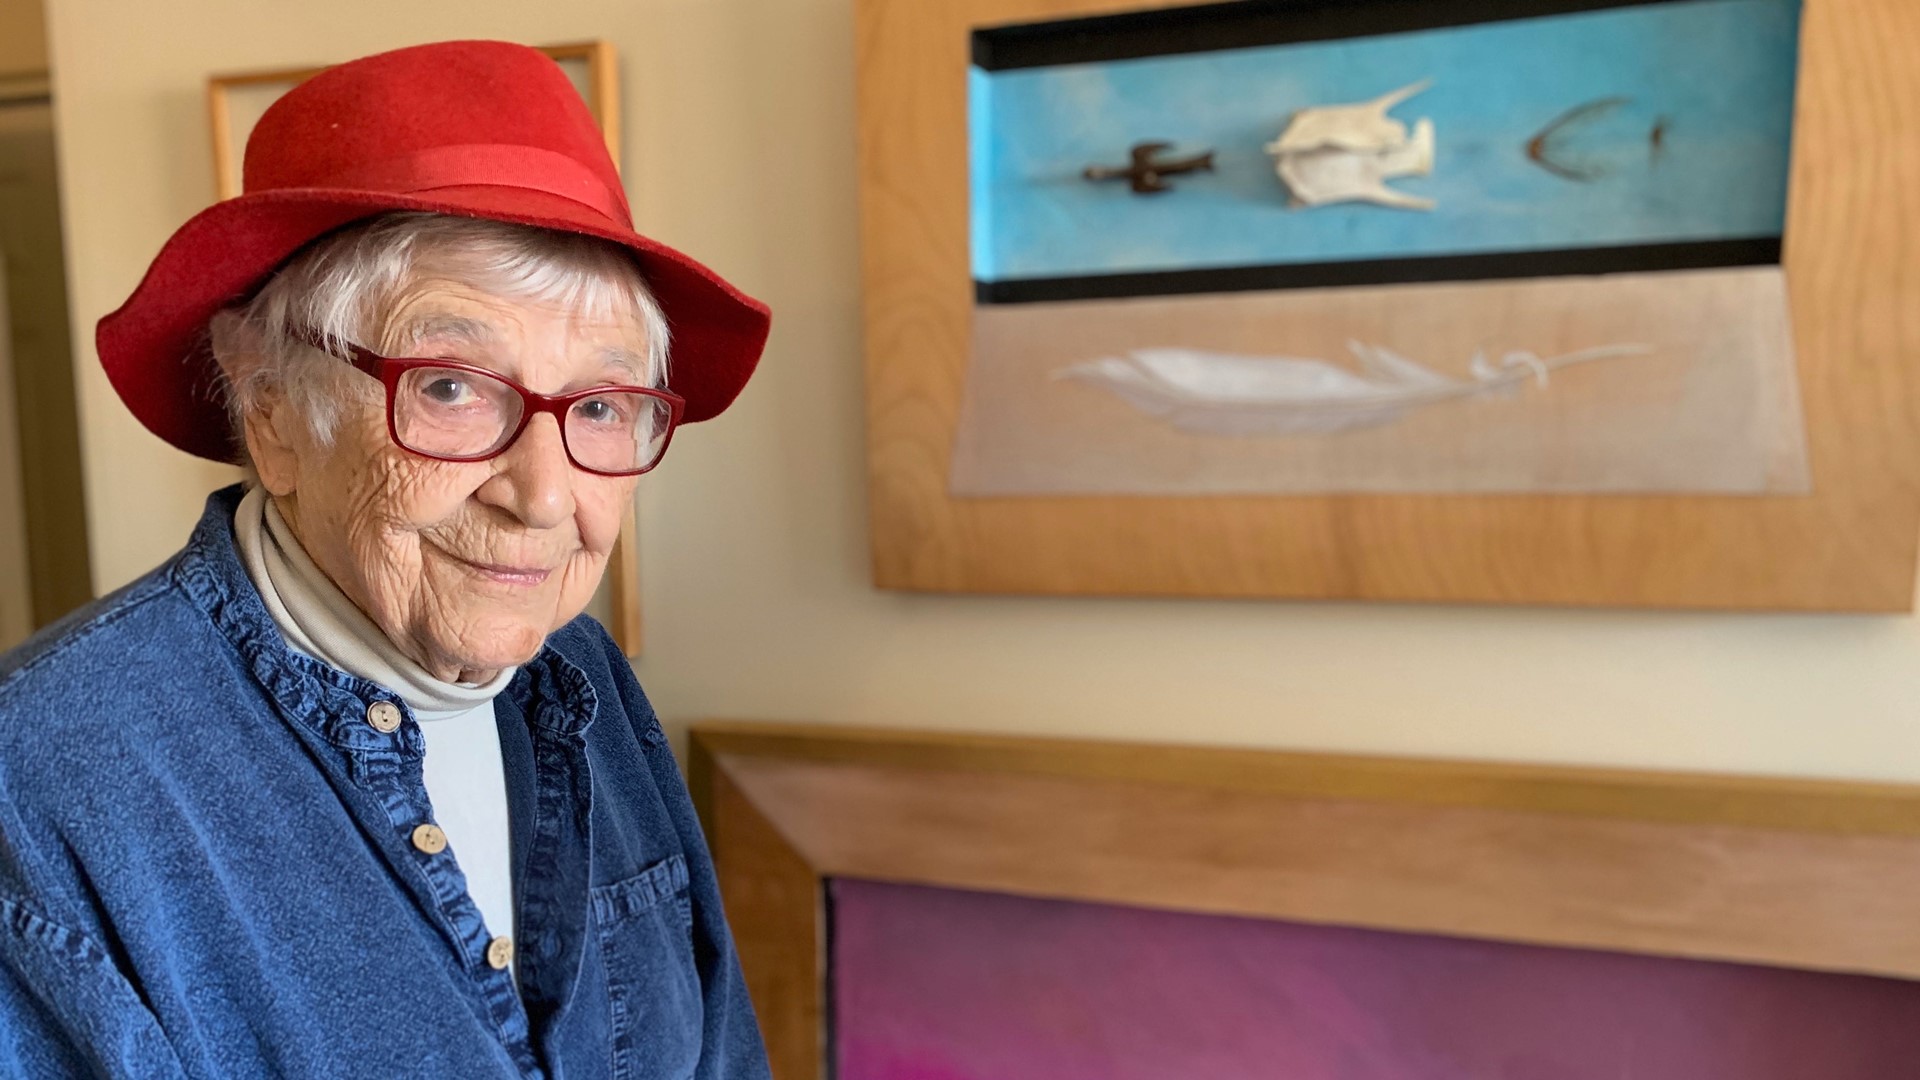 Artist Constance Keirmaier, 93, teaches residents at Bartlett Woods in Rockland, some who have never picked up a paintbrush.